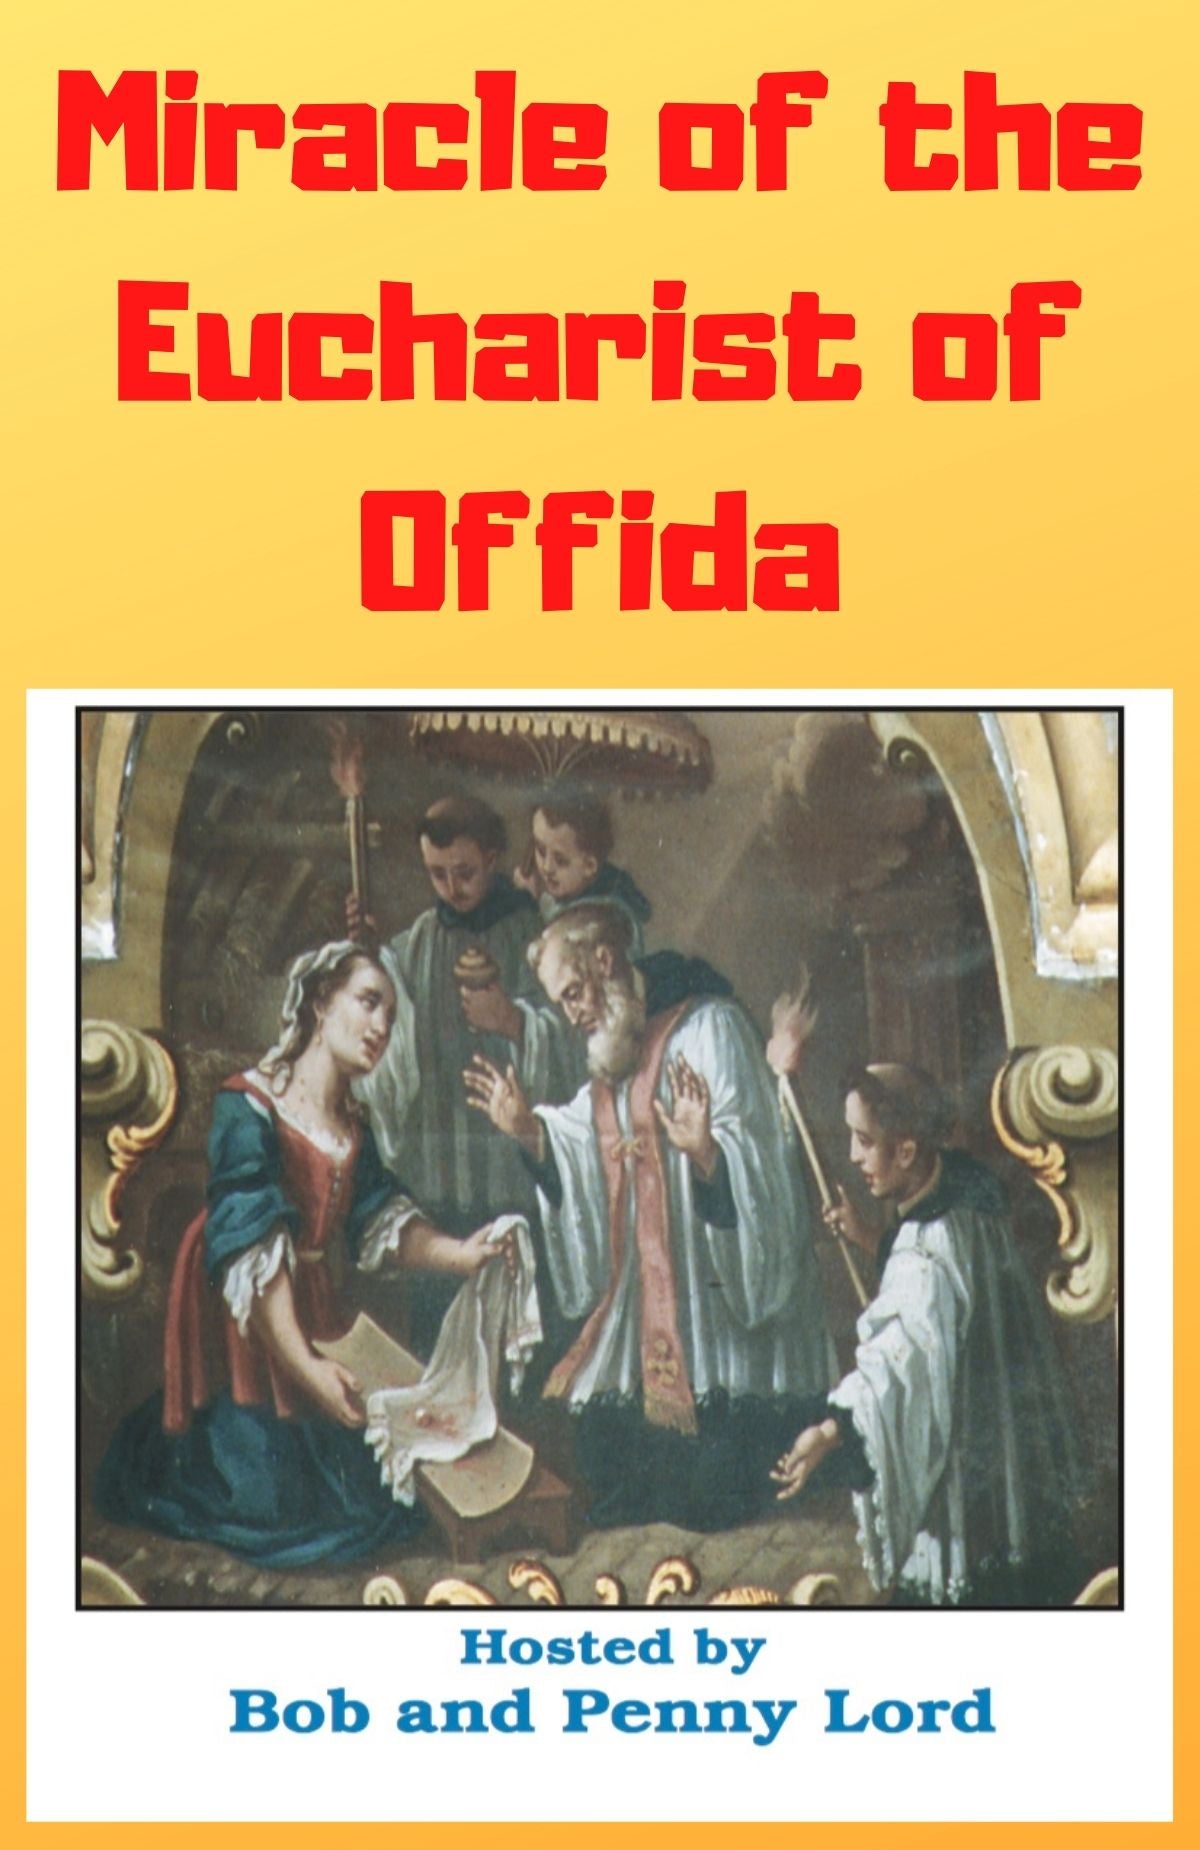 Miracles of the Eucharist Complete Series 13 MP4 Downloads - Bob and Penny Lord